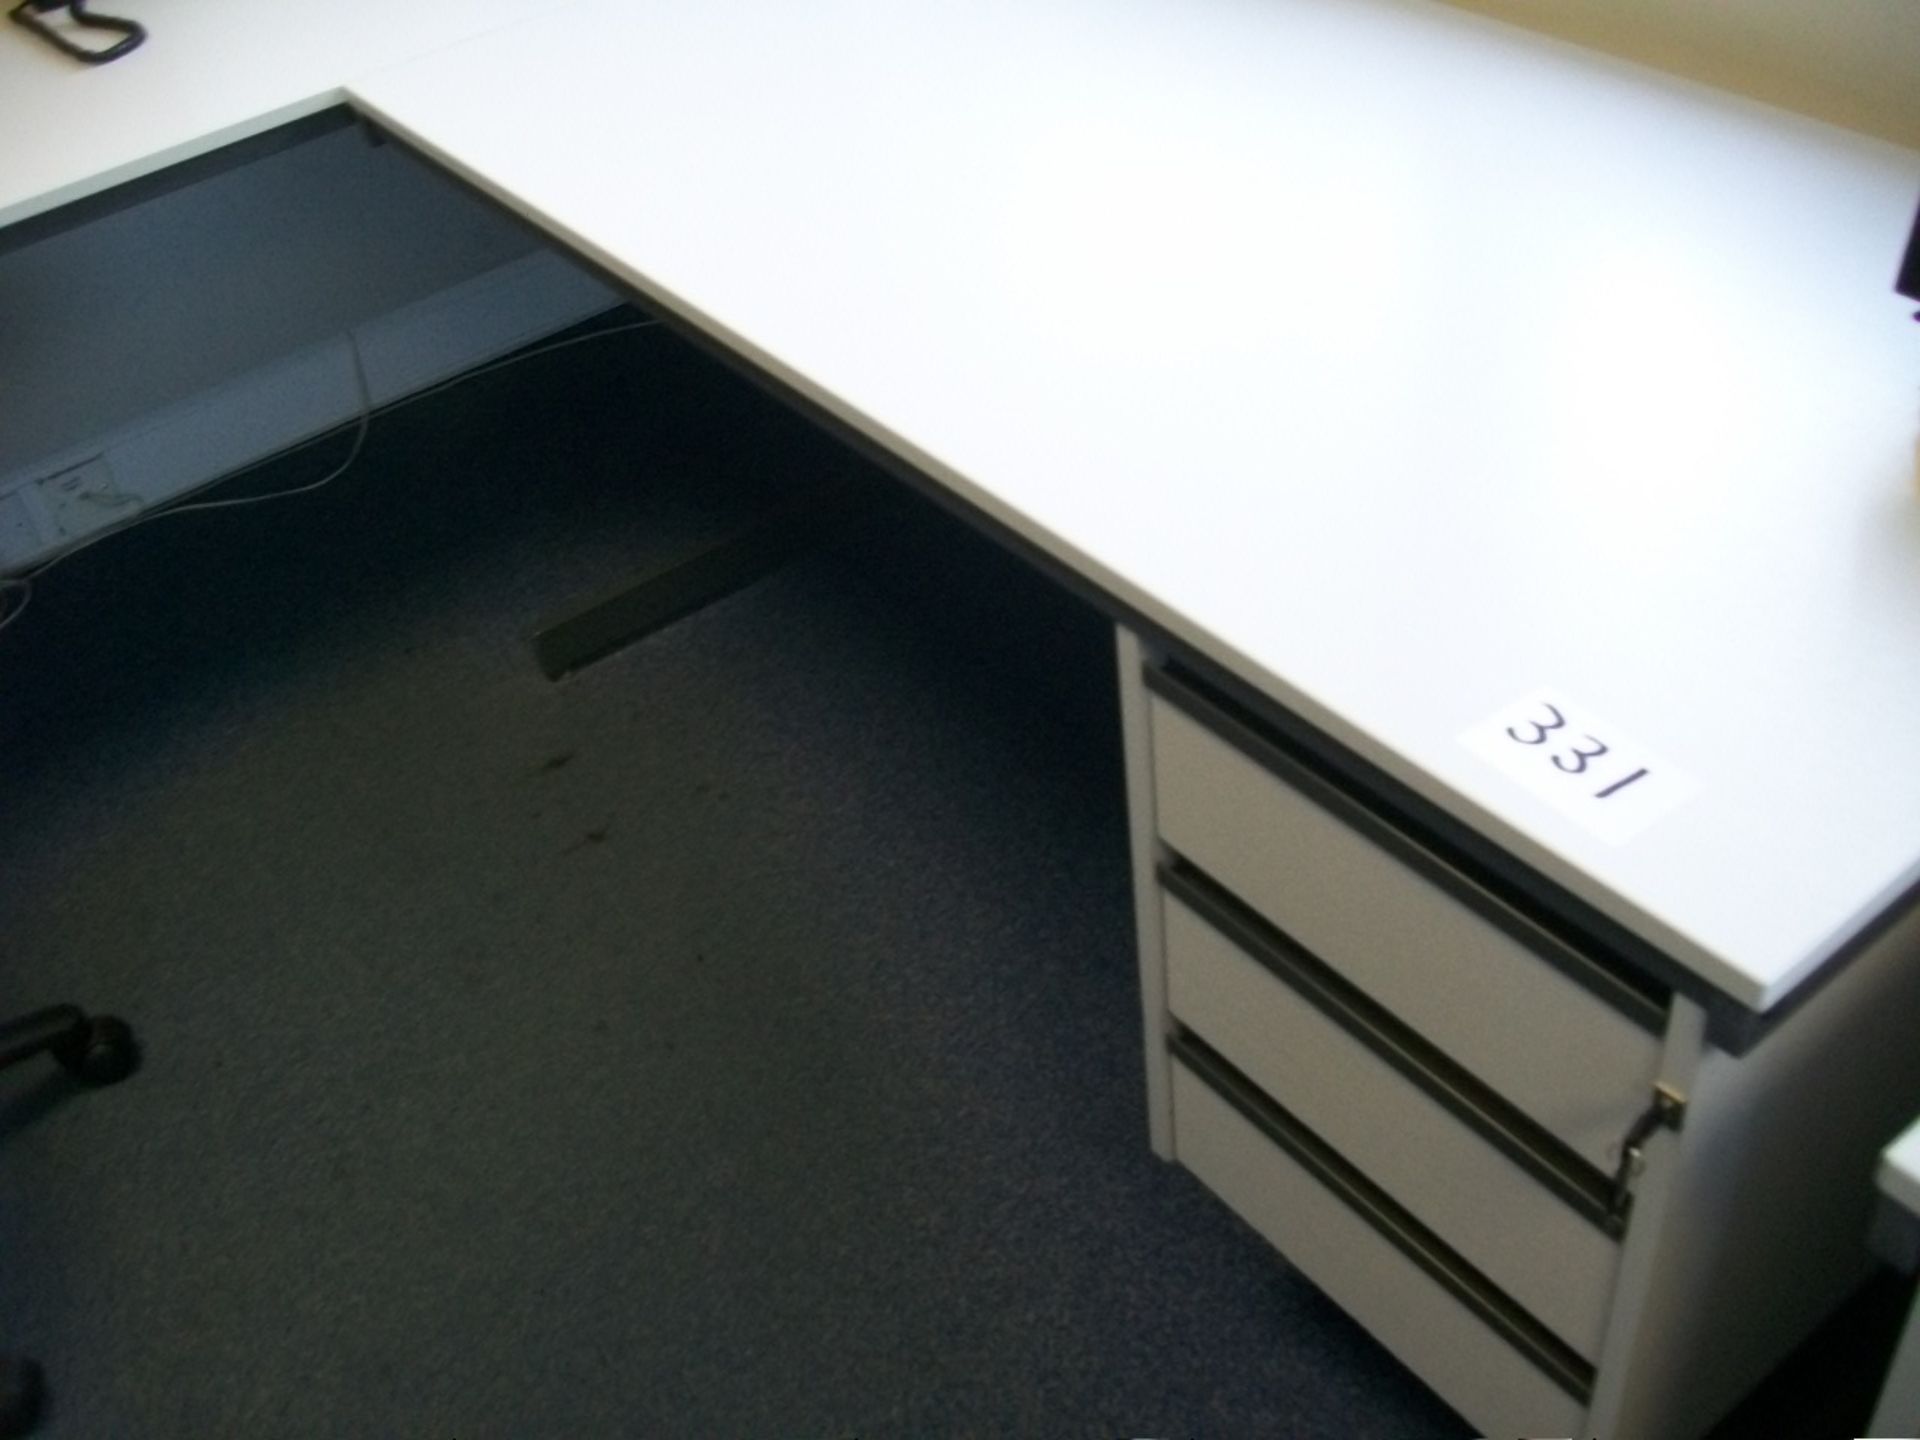 2'6" x 6' light grey 'L' shaped DESK with single pedestal drawers (Situated at Arthur Amos